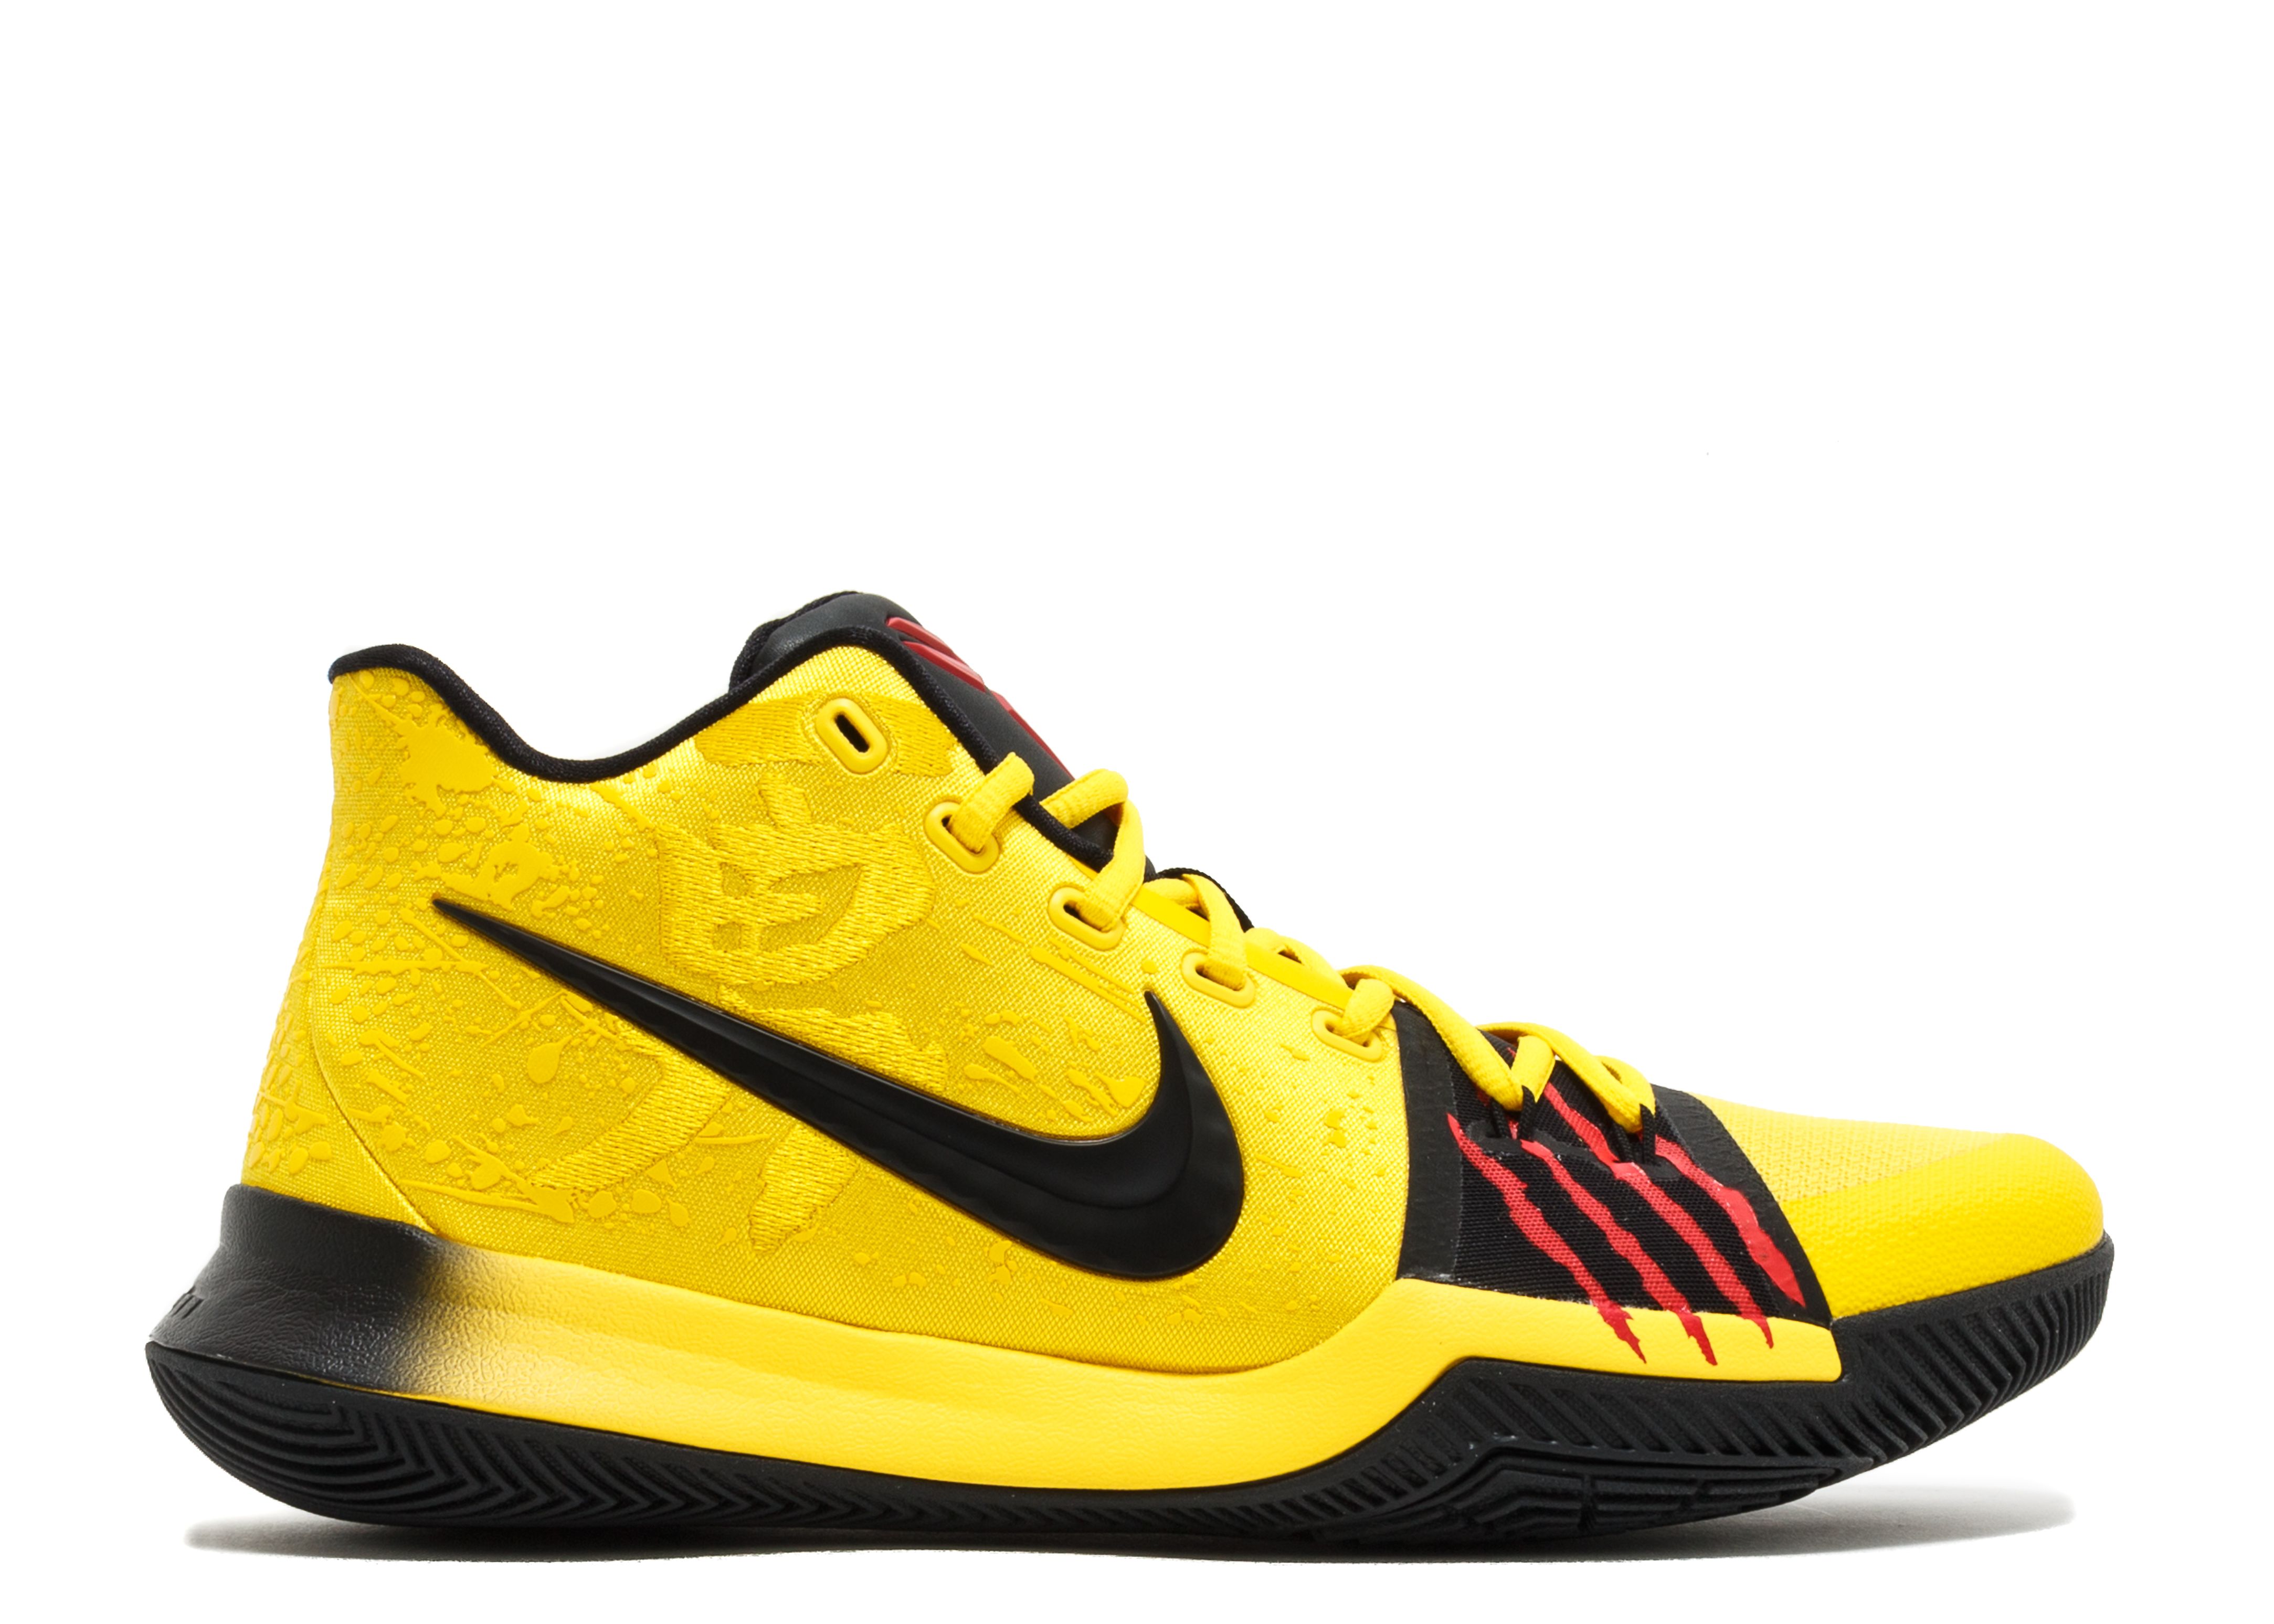 kyrie shoes black and yellow